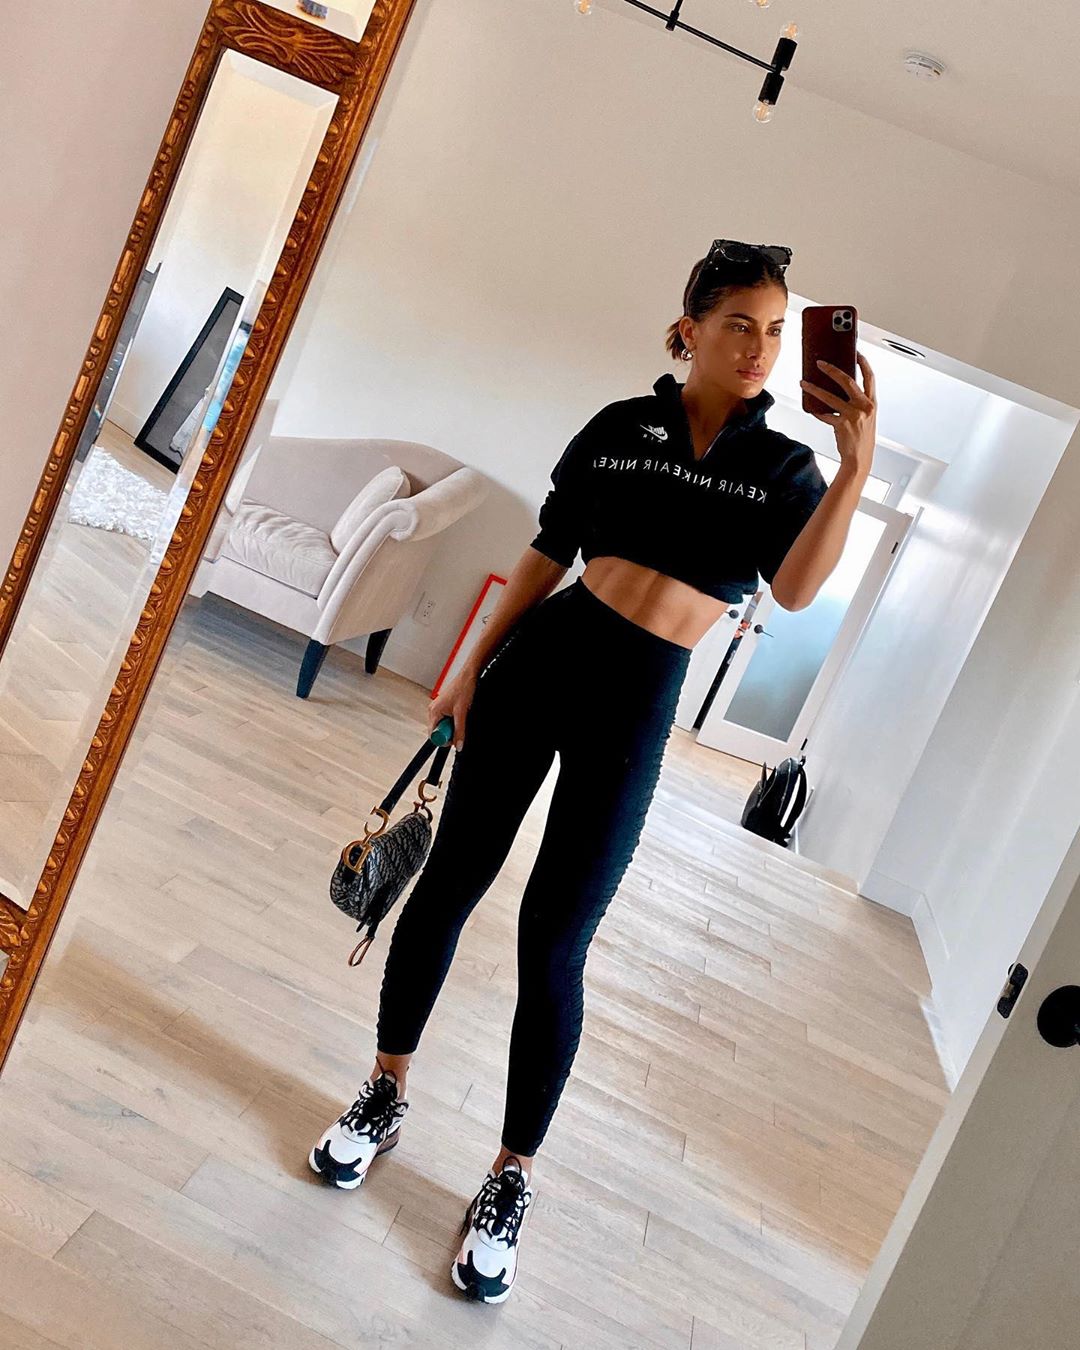 What to Wear For an At-Home Workout Camila Coelho